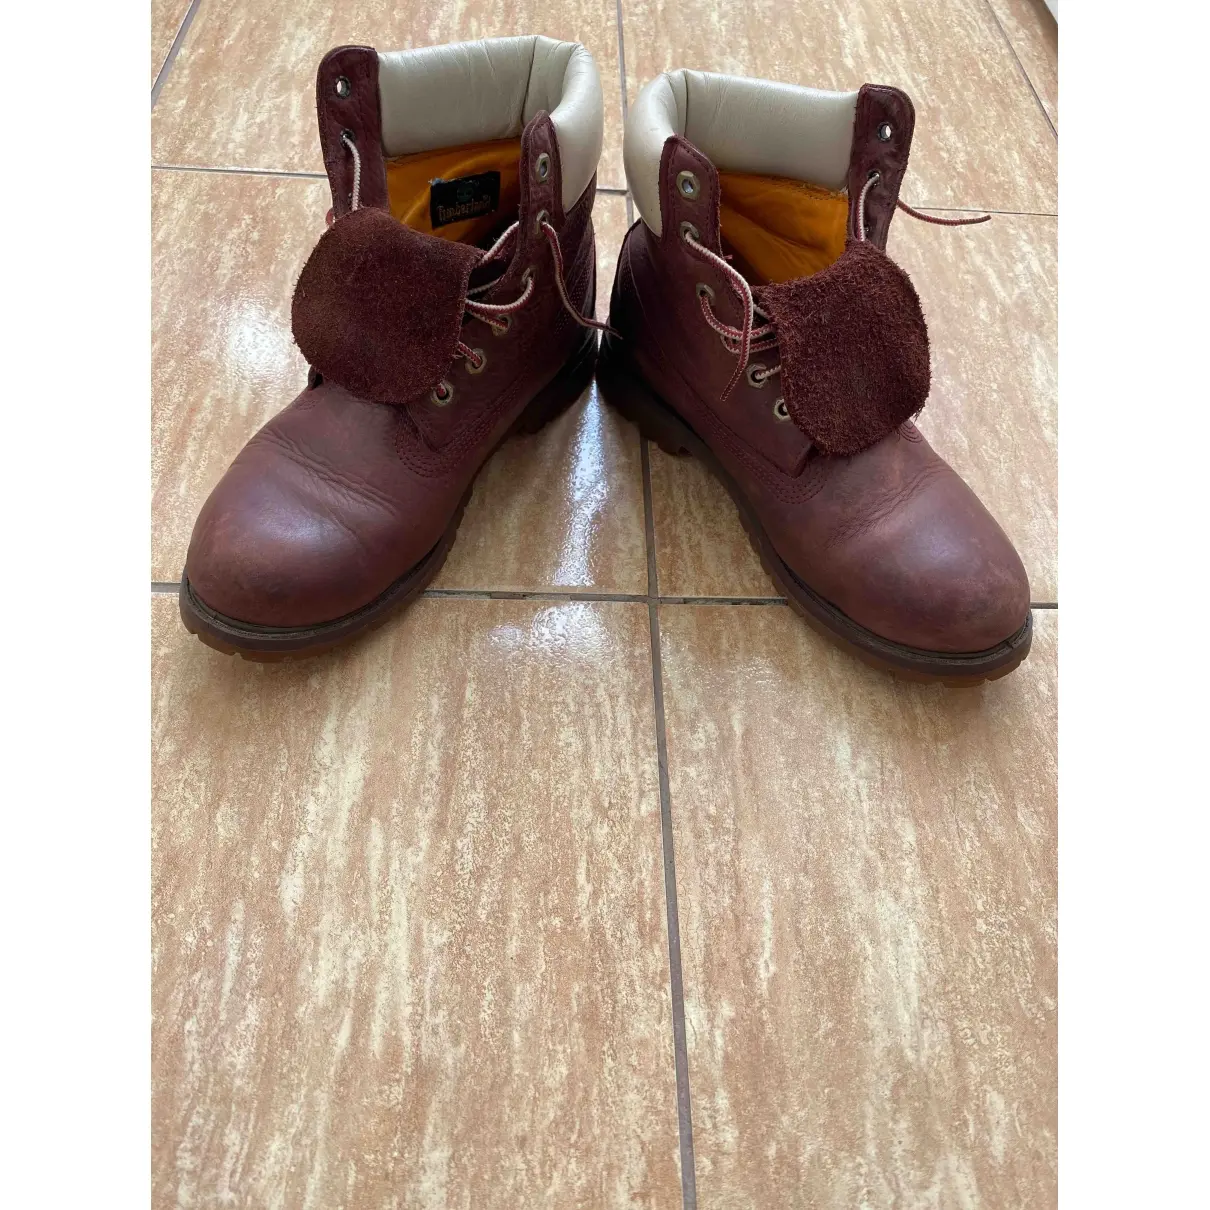 Timberland Leather boots for sale